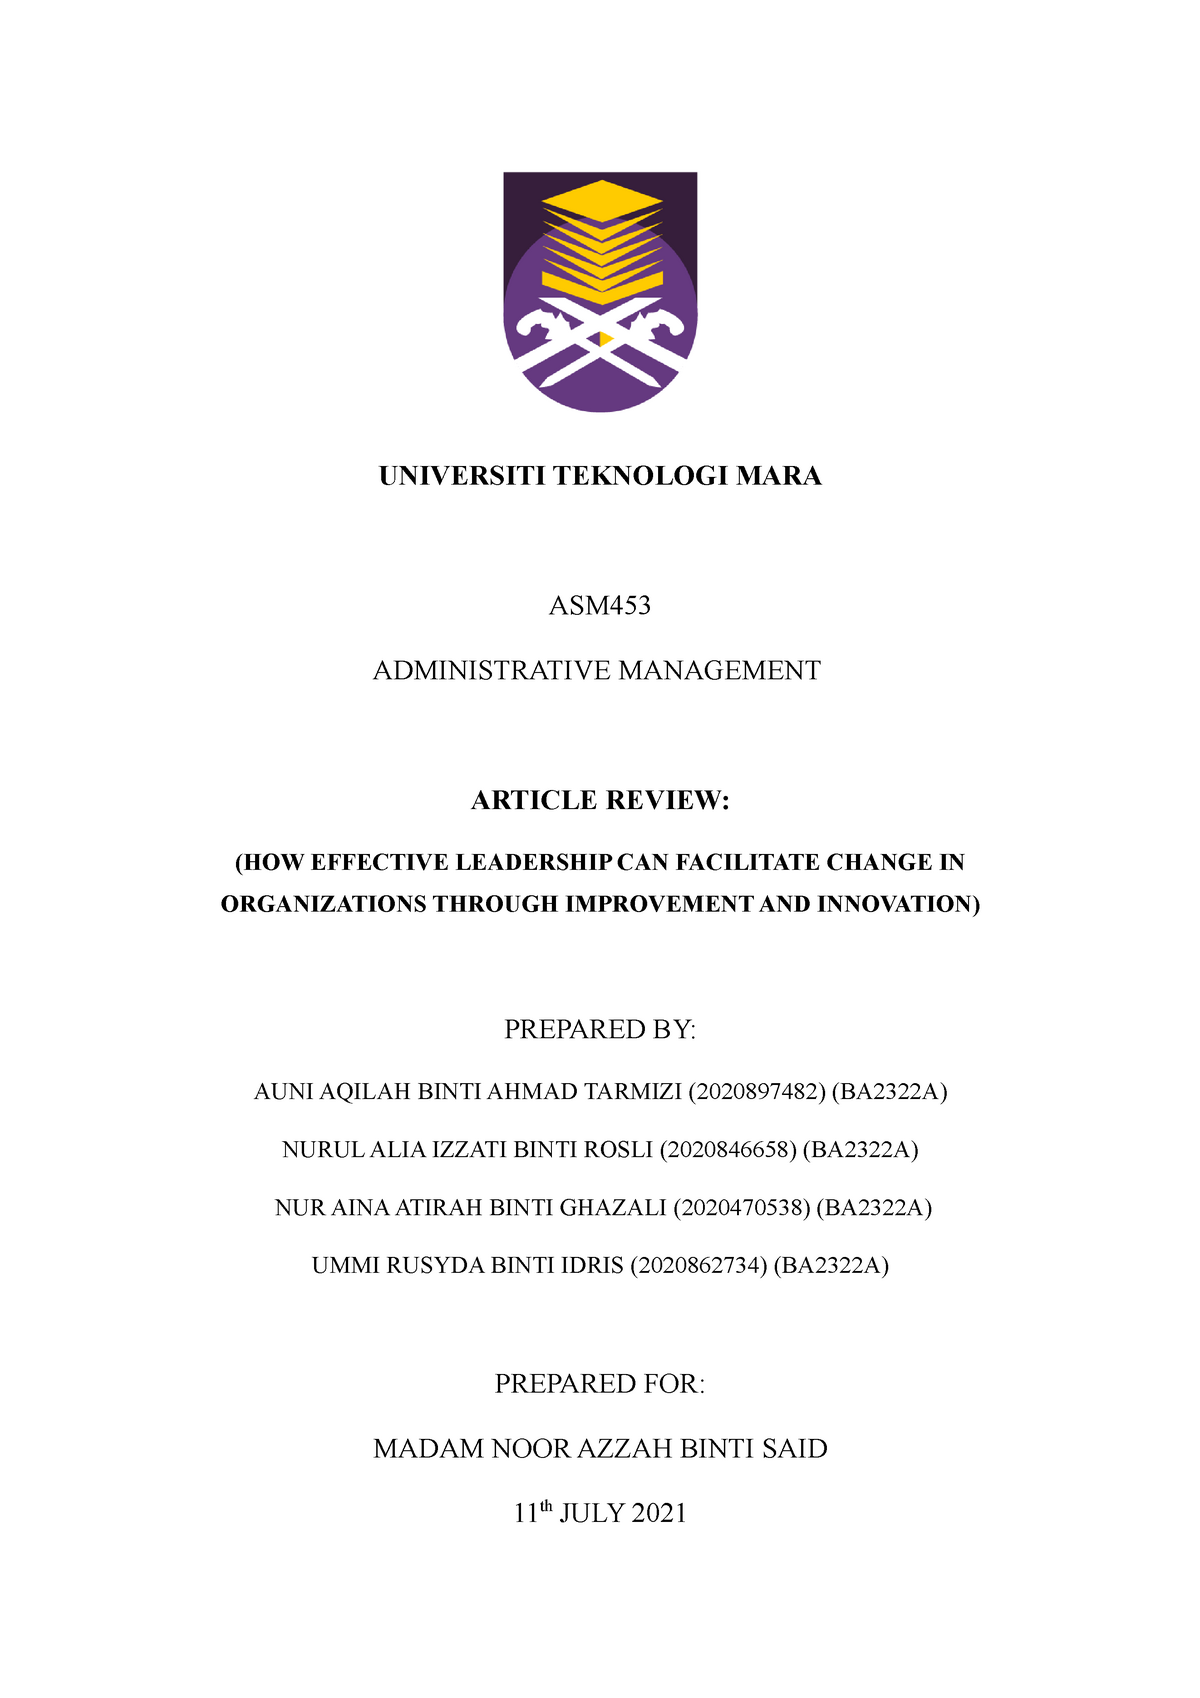 article review format uitm